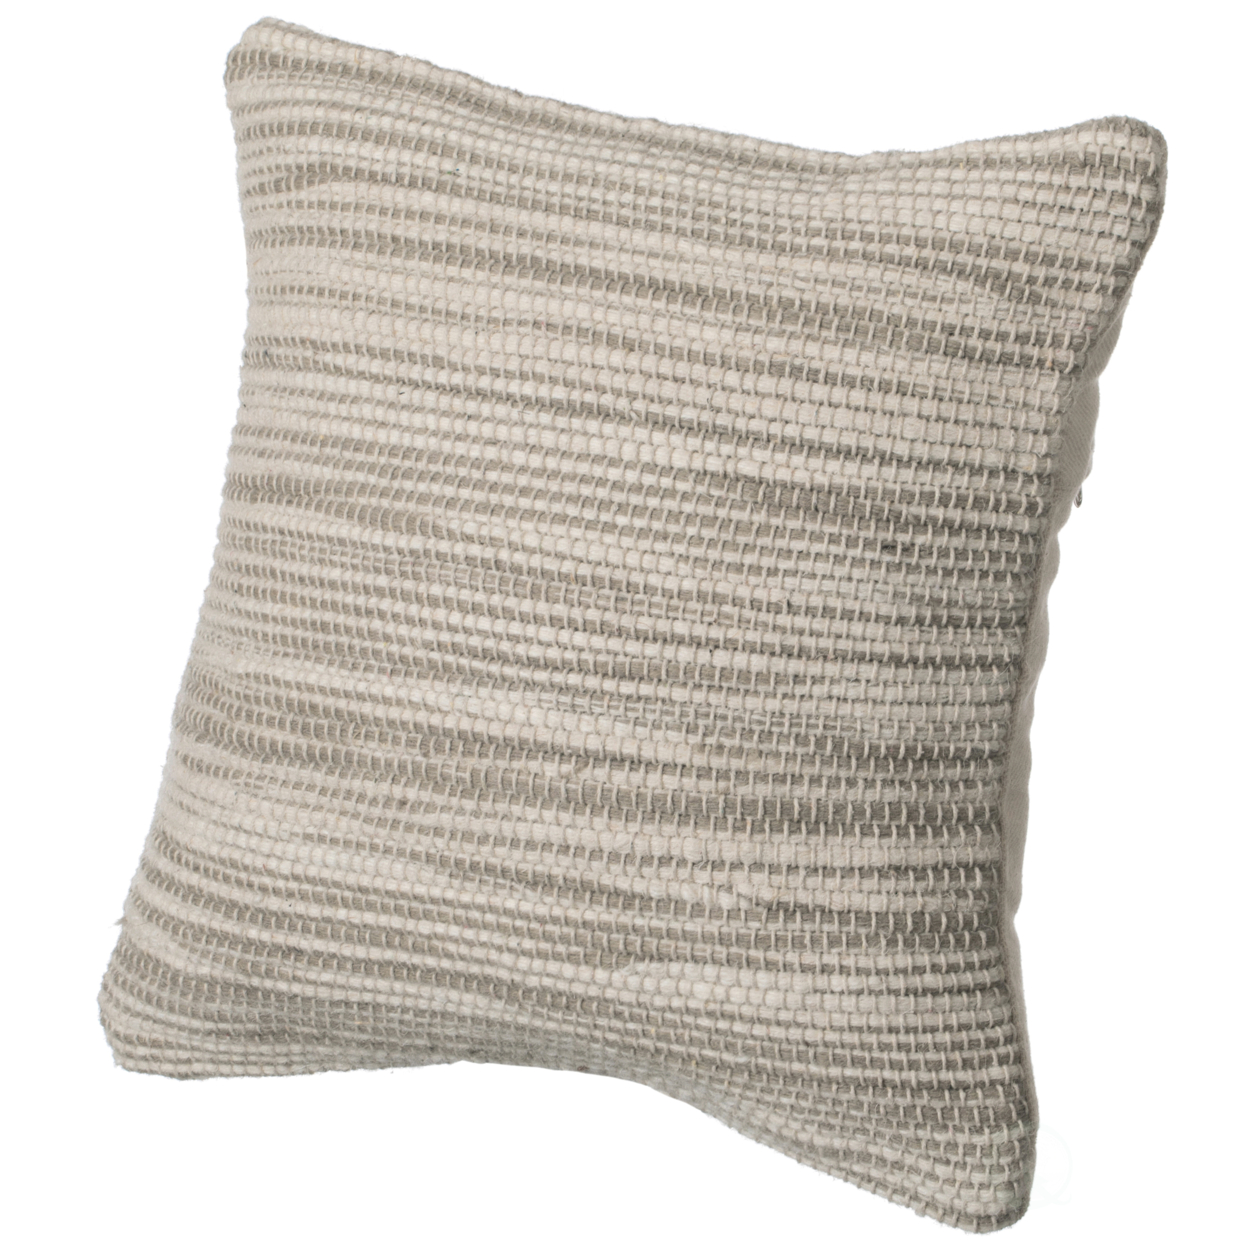 16 Handwoven Wool & Cotton Throw Pillow Cover With Woven Knit Texture - Beige